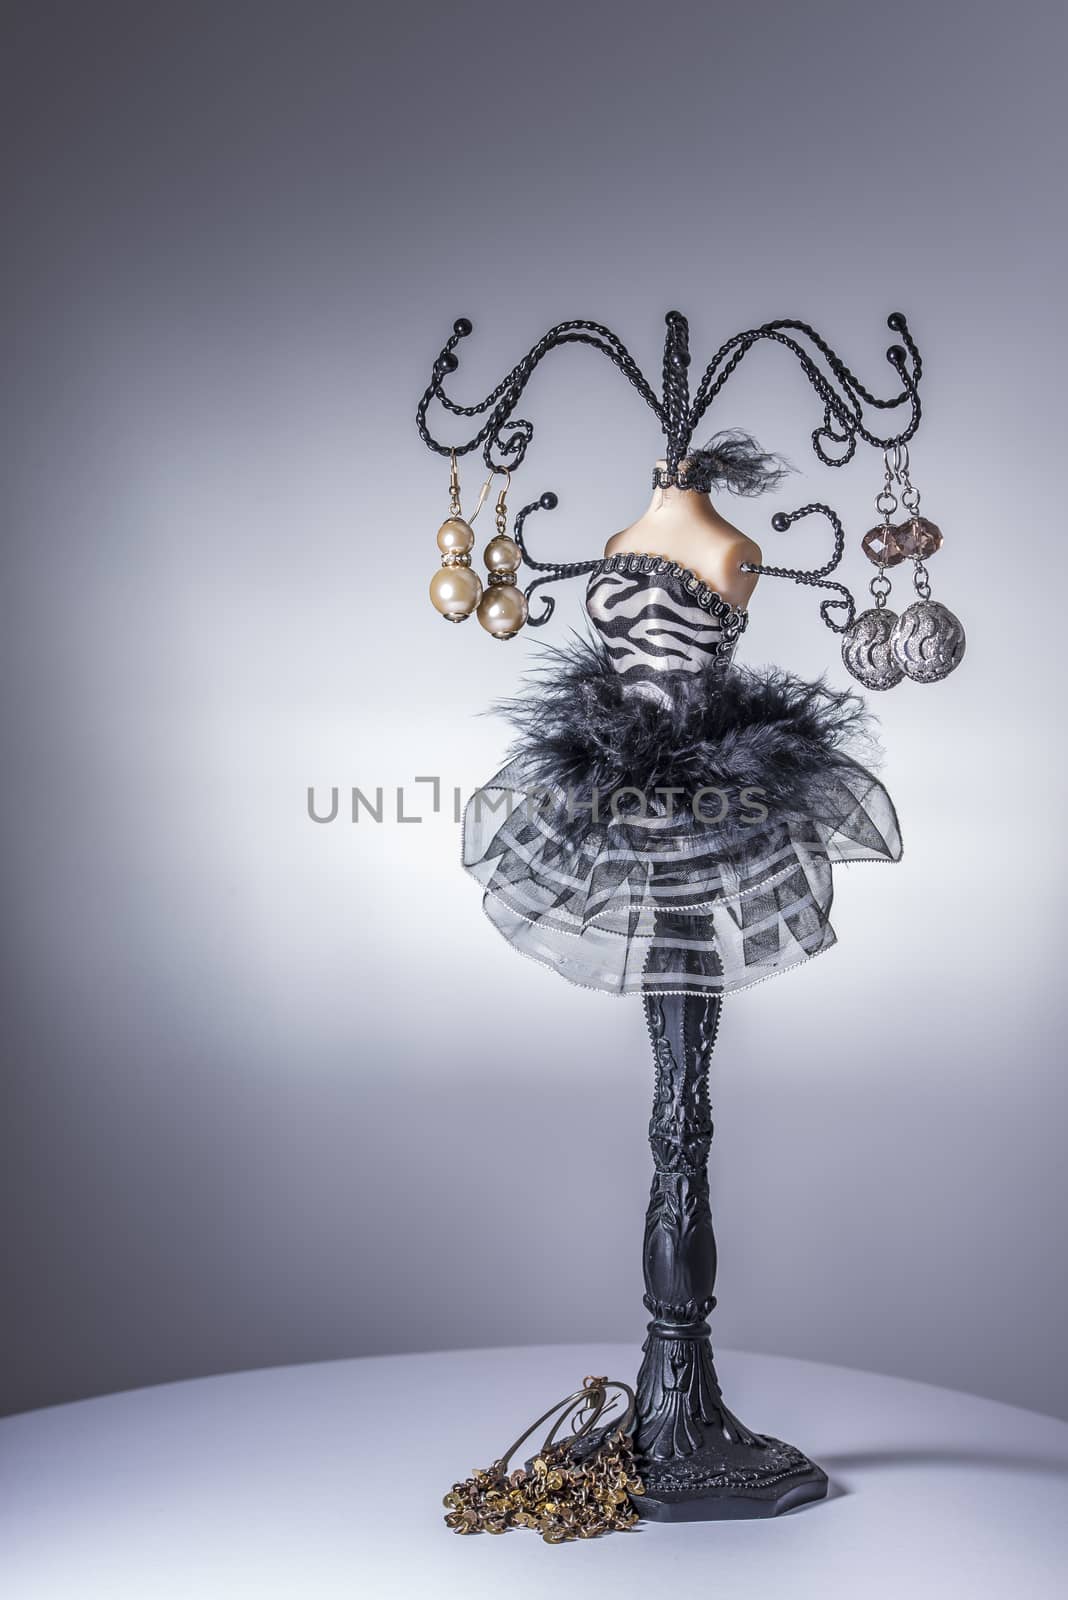 Black jewelery display stand / hanger in form of a woman’s bust in black and white dress with metallic arms as holders